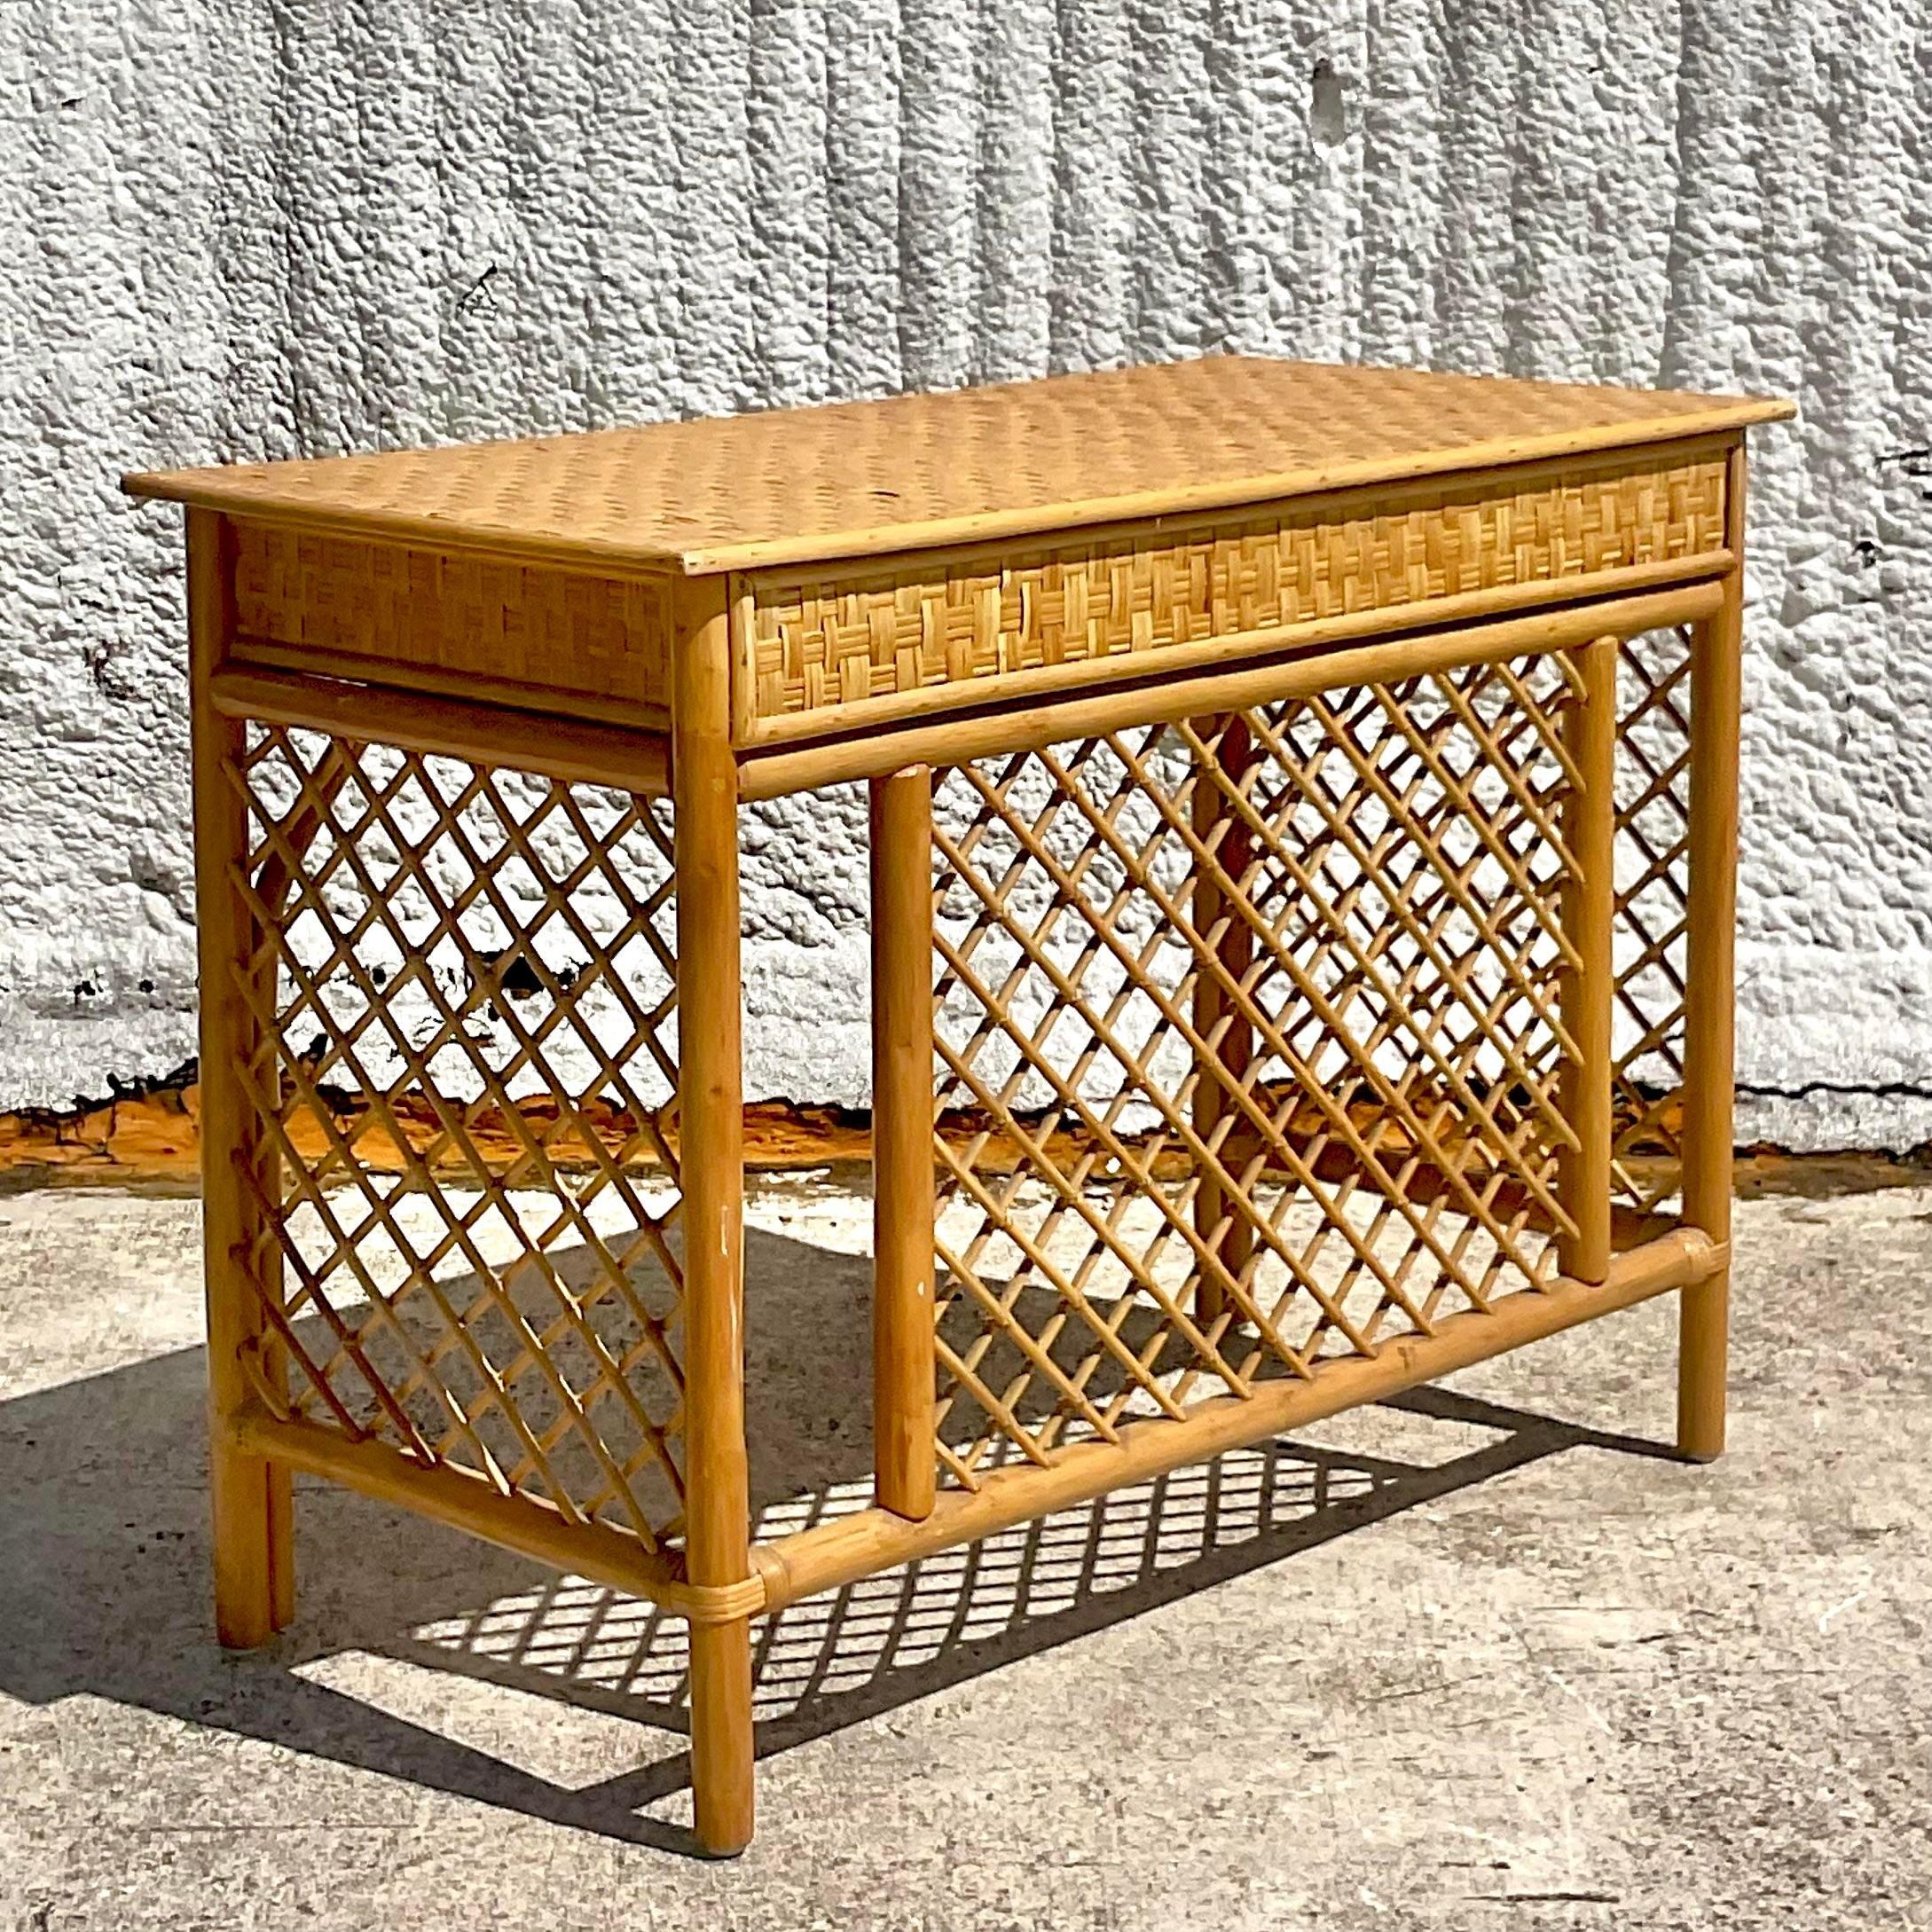 Immerse yourself in coastal tranquility with our Vintage Coastal Trellis Rattan Writing Desk. Handcrafted with meticulous detail and inspired by classic American design, this desk blends the natural allure of rattan with the timeless elegance of